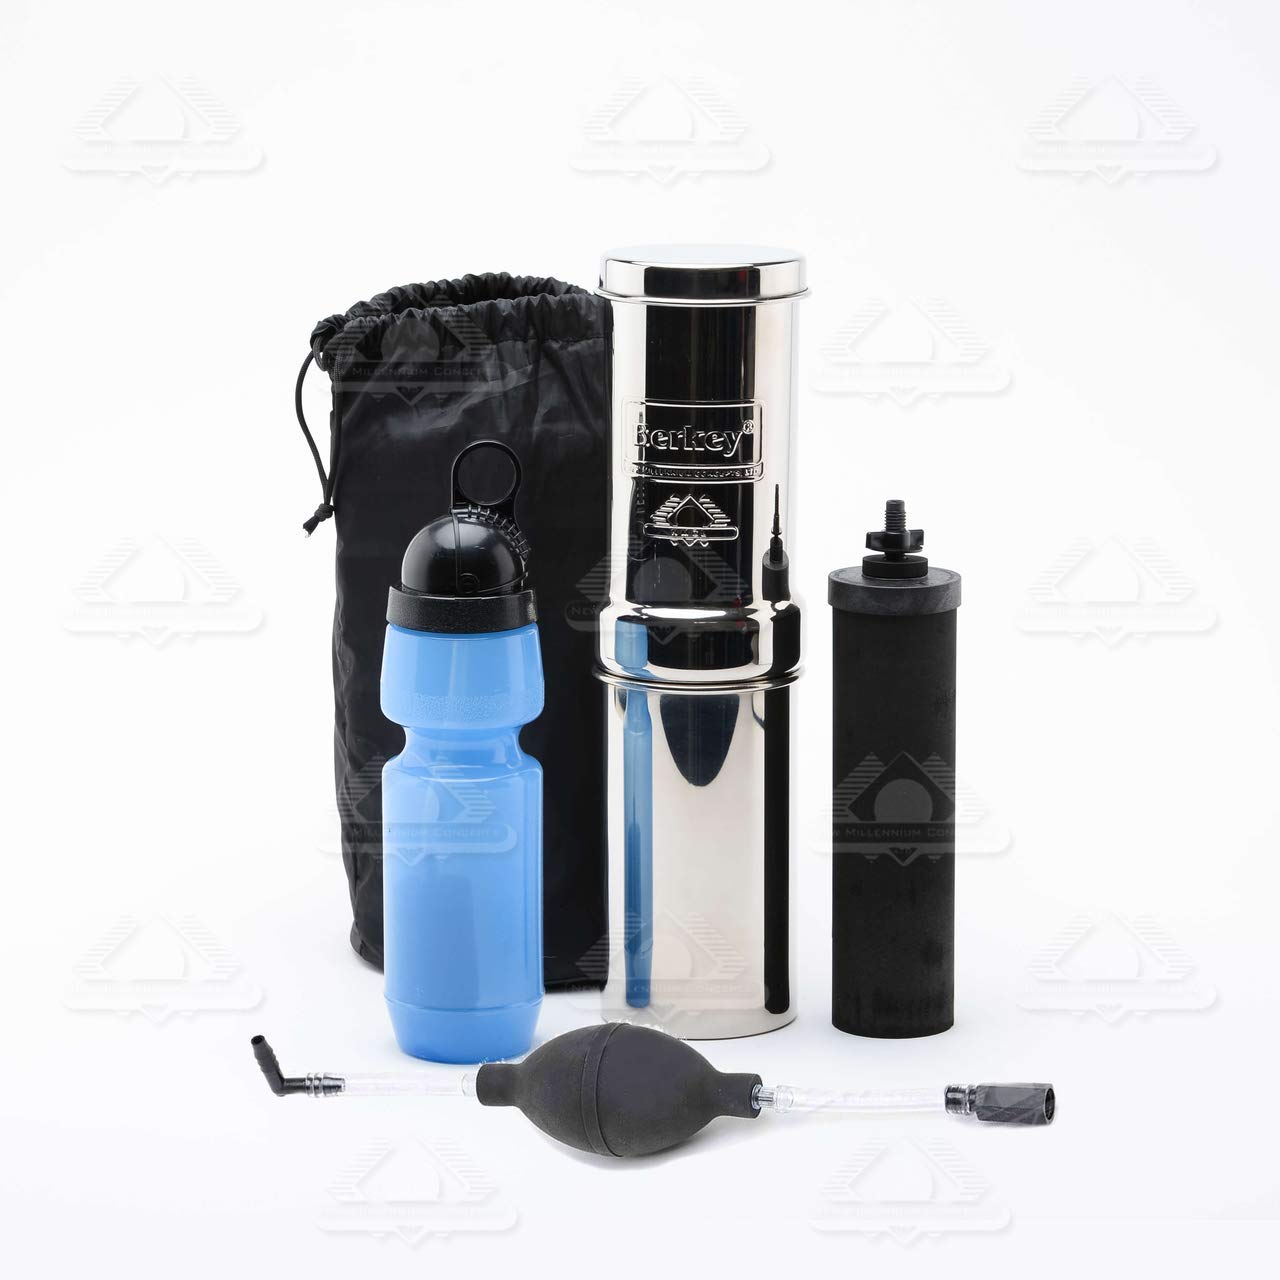 Go Berkey Kit -Includes Stainless Steel Portable Water Filter System with Sport Berkey Water Bottle (Filter included) and a Vinyl Black Carrying Case